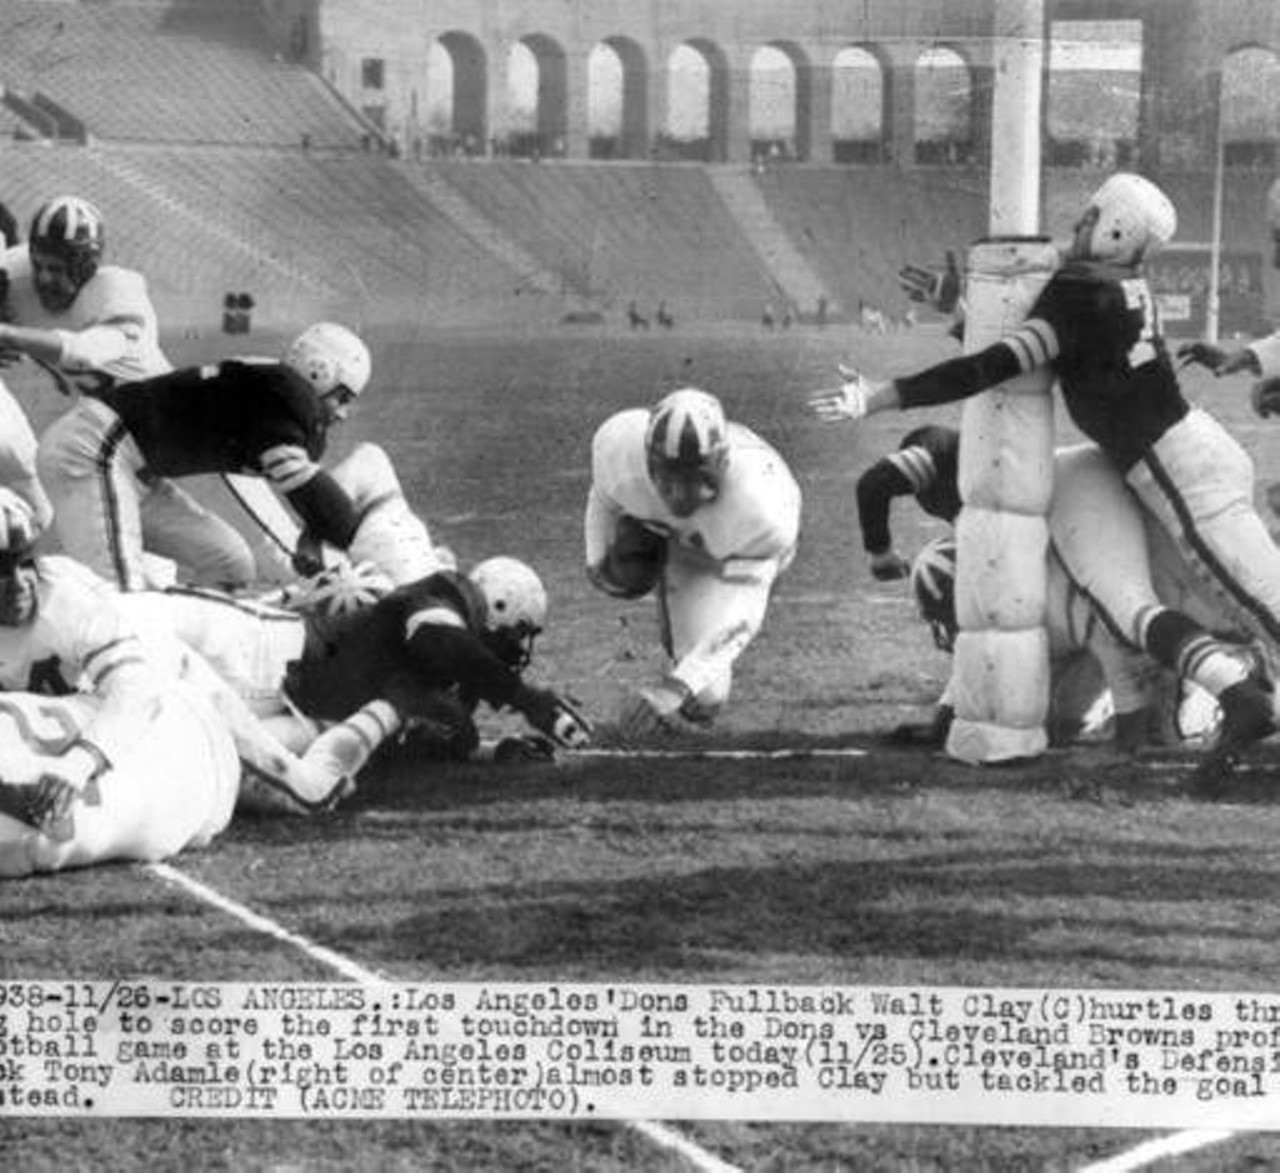 Cleveland Browns vs. Los Angeles Dons, 1946